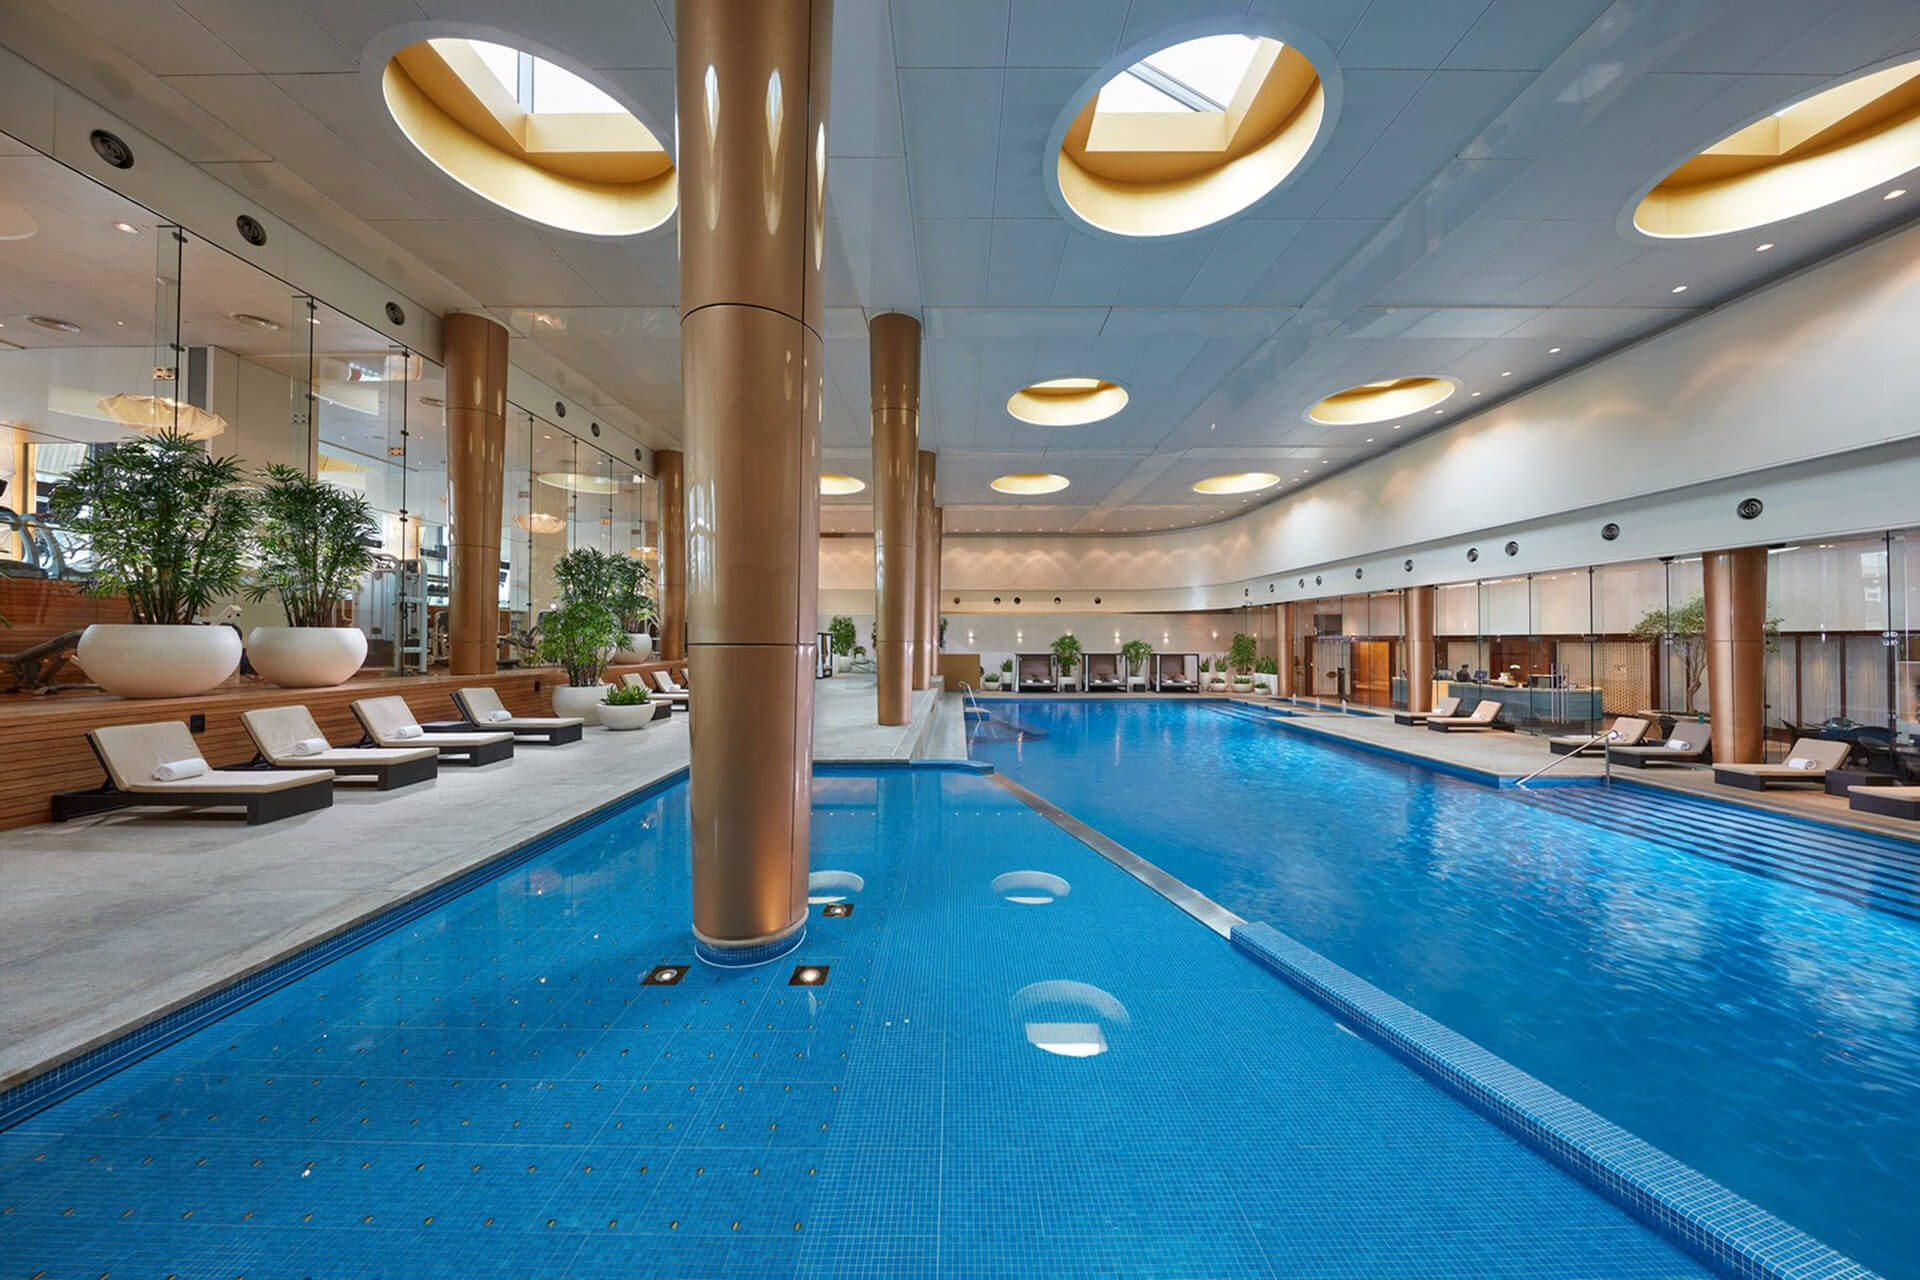 Crown Spa in Melbourne is one of Australia's top spas